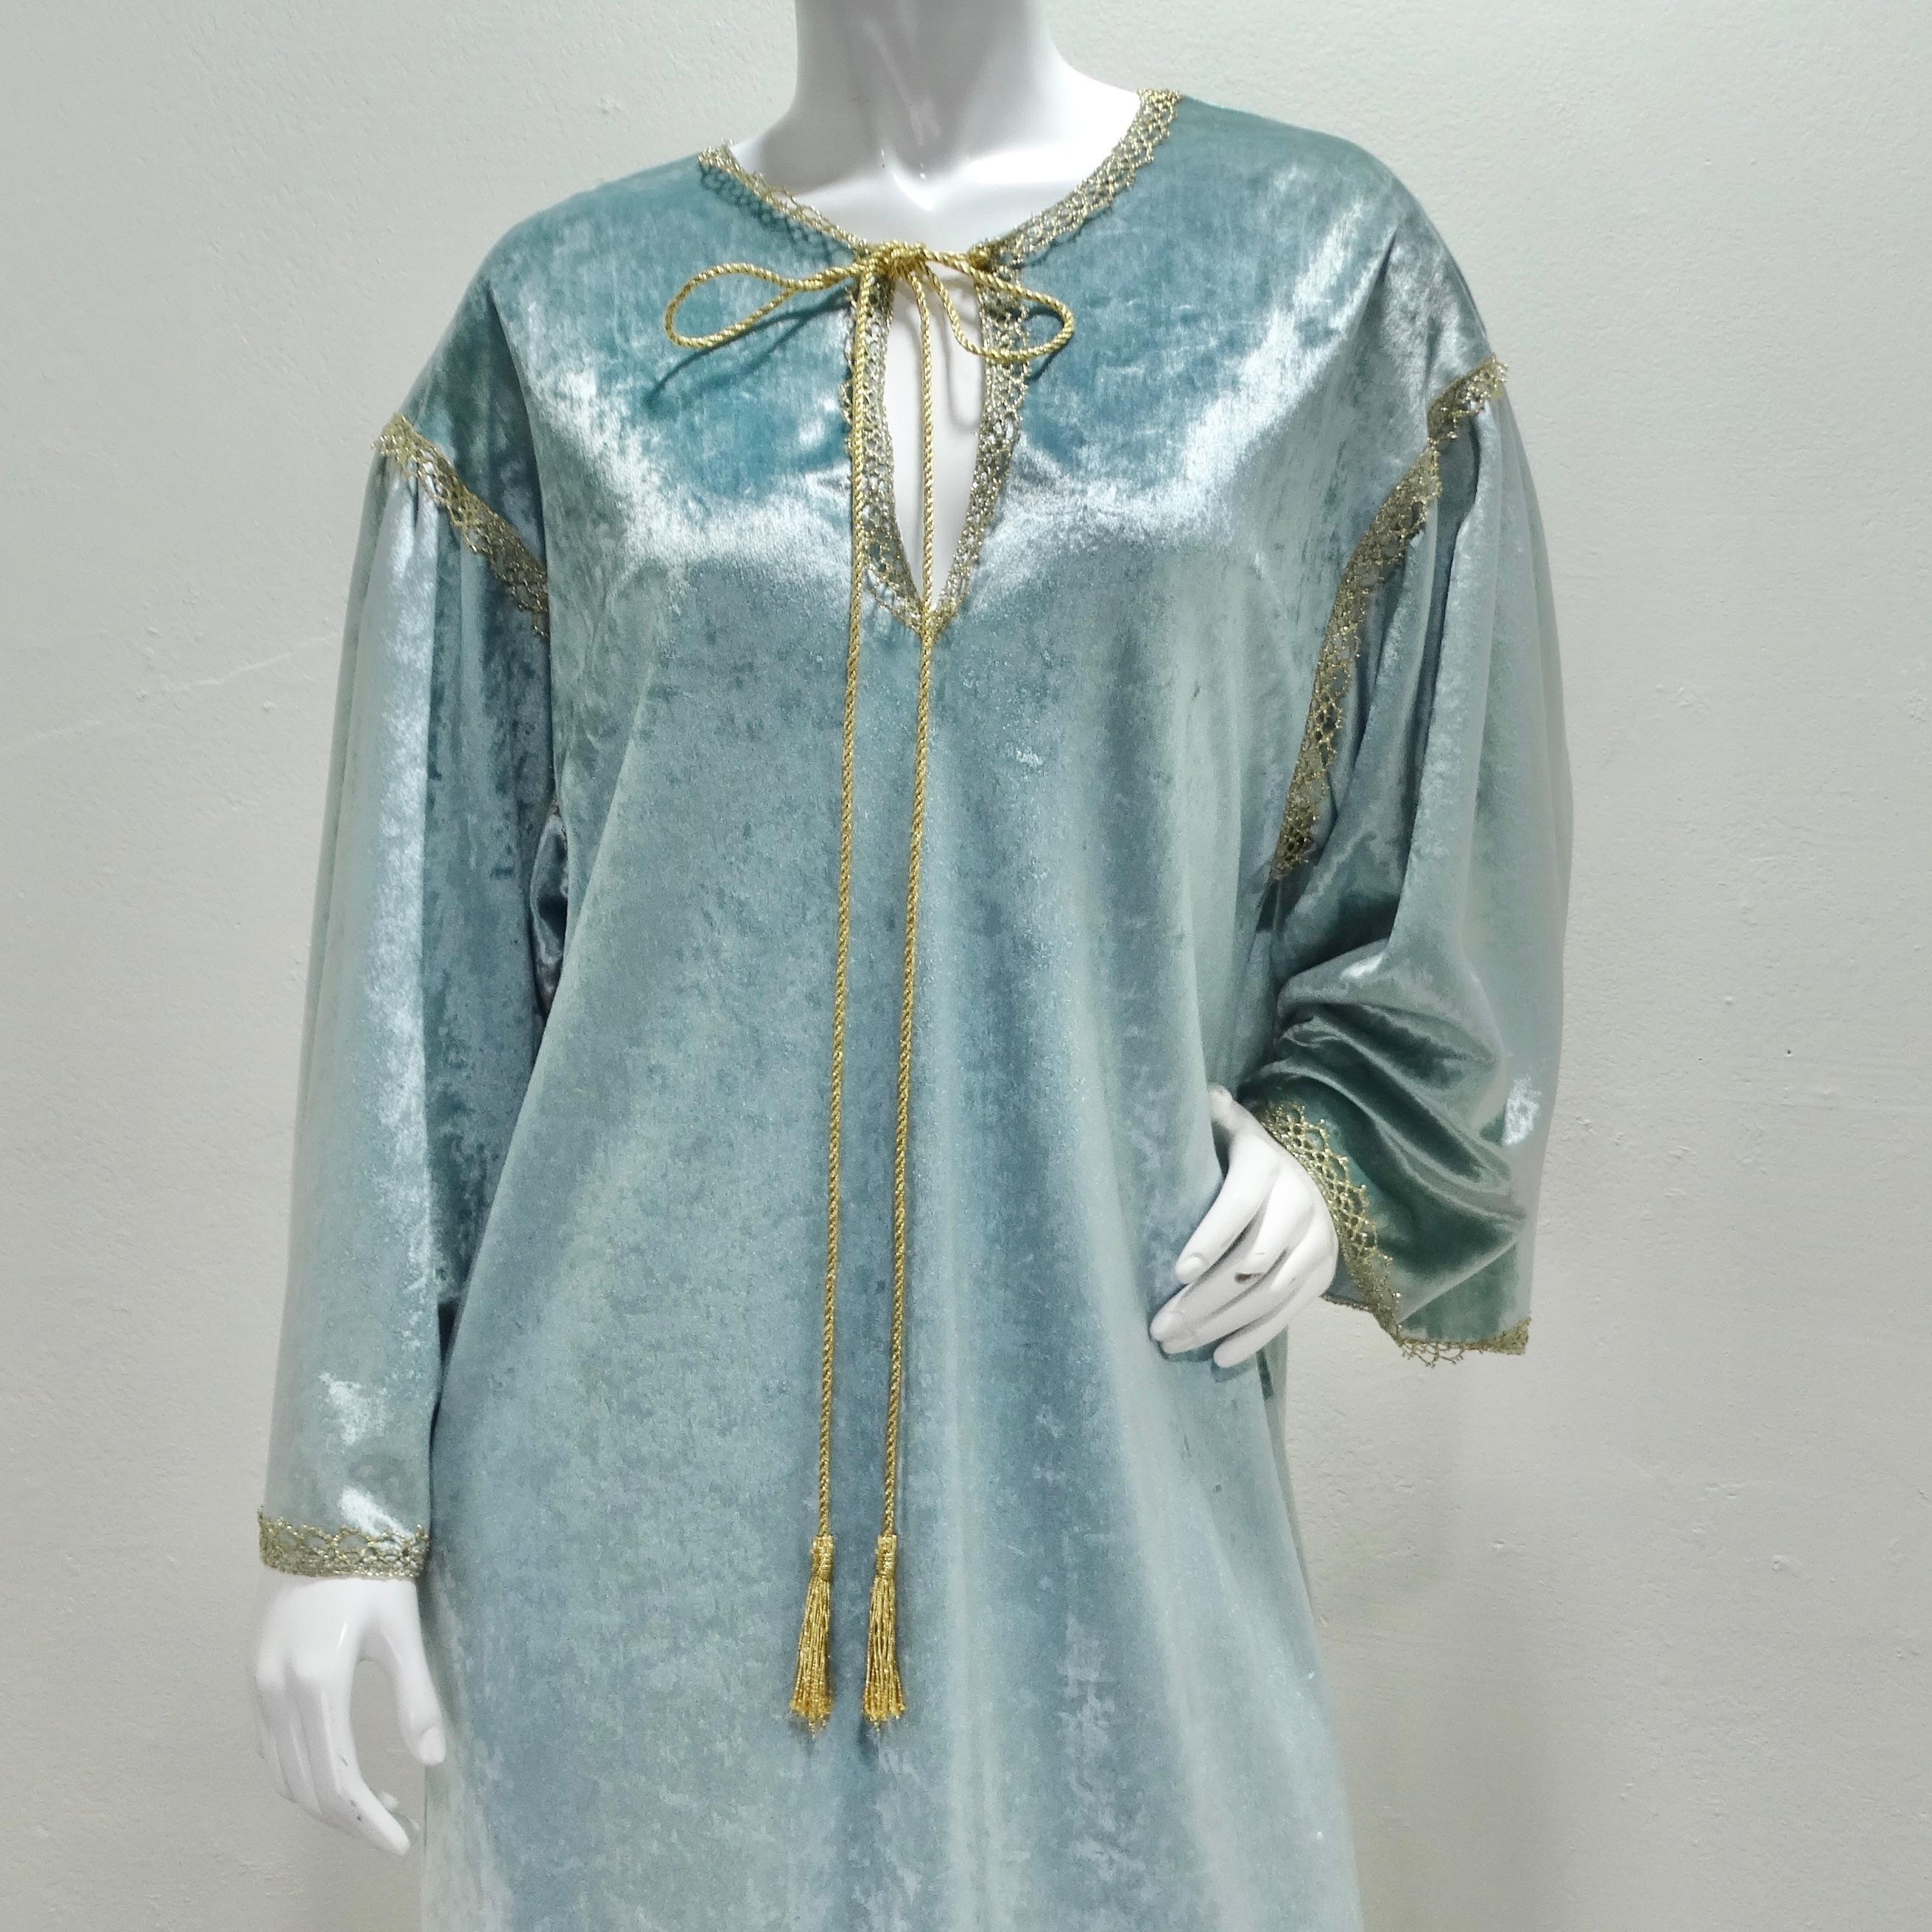 Indulge in luxurious comfort and timeless style with the Bill Tice 1980s Blue Velvet Kaftan. This exquisite kaftan style dress offers a cozy and relaxed fit, making it the epitome of effortless elegance. Crafted from a sumptuous light blue velvet